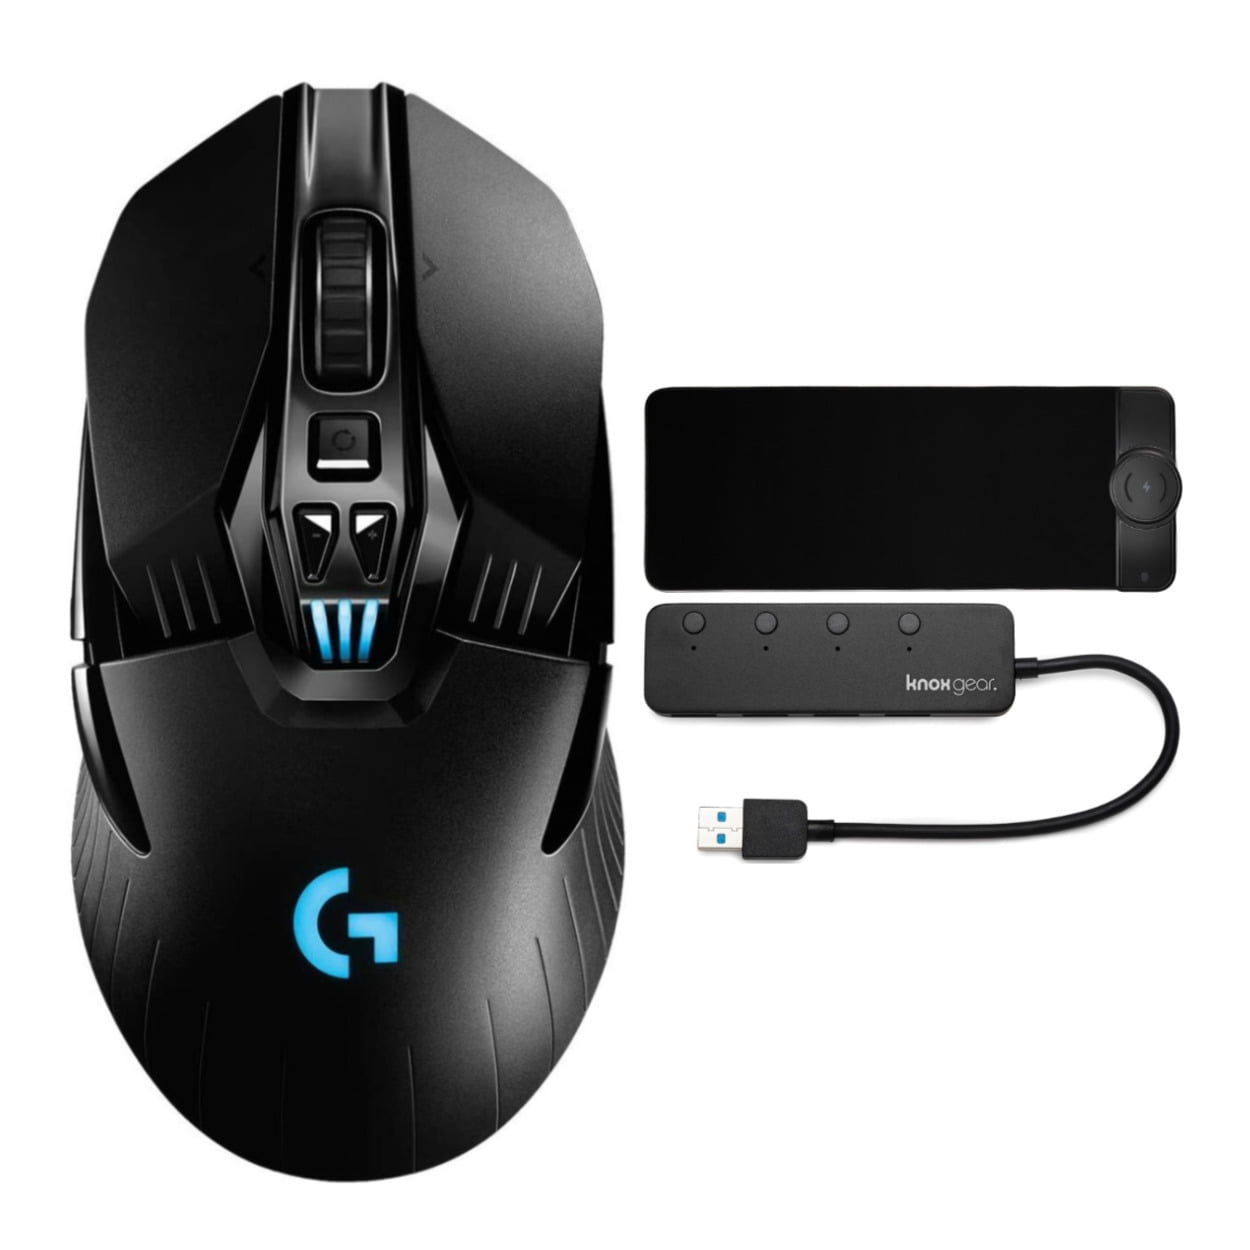 Logitech G903 Wireless Gaming Mouse Bundle with Mouse Pad and USB 3.0 Hub -